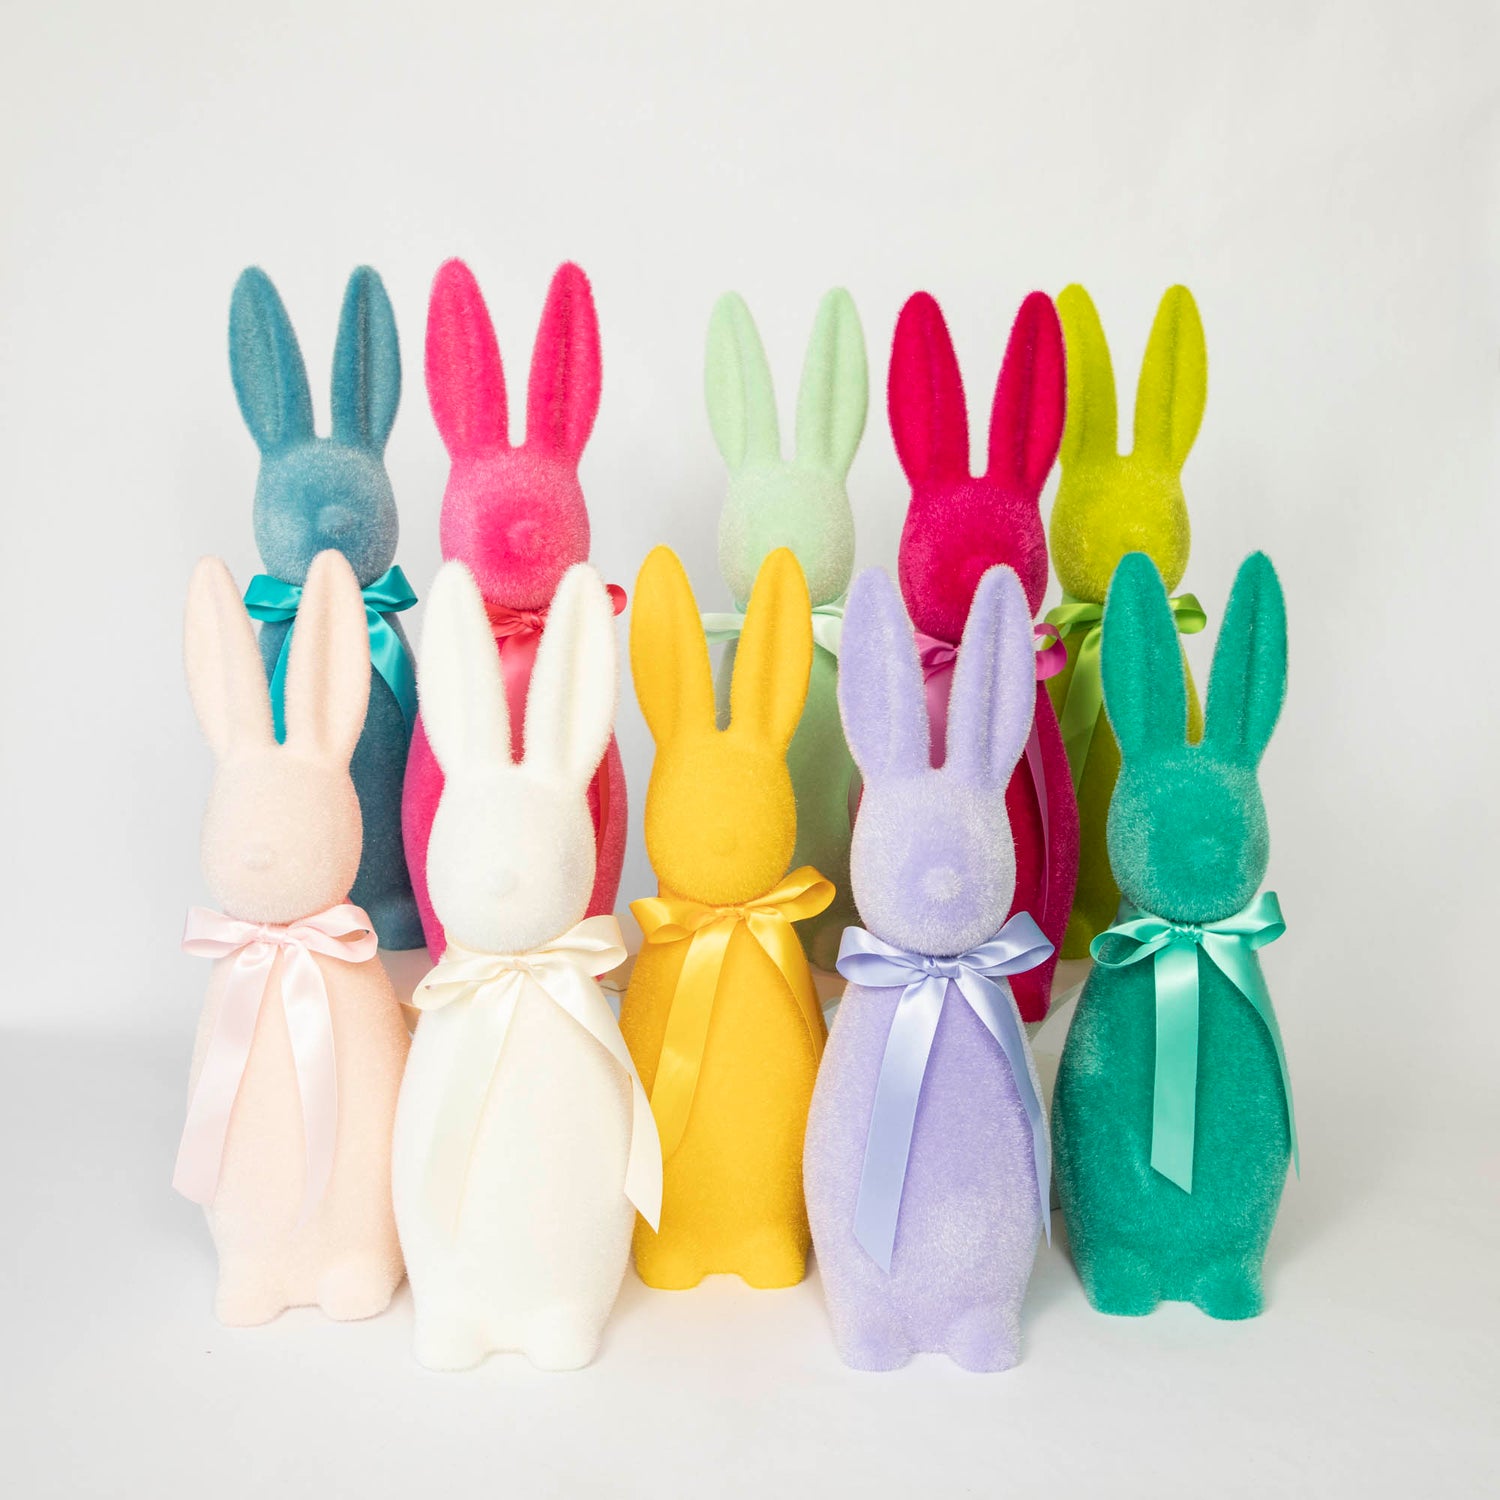 A group of Glitterville Medium Flocked Button Nose Bunny rabbits, perfect for an Easter celebration and as a special gift.